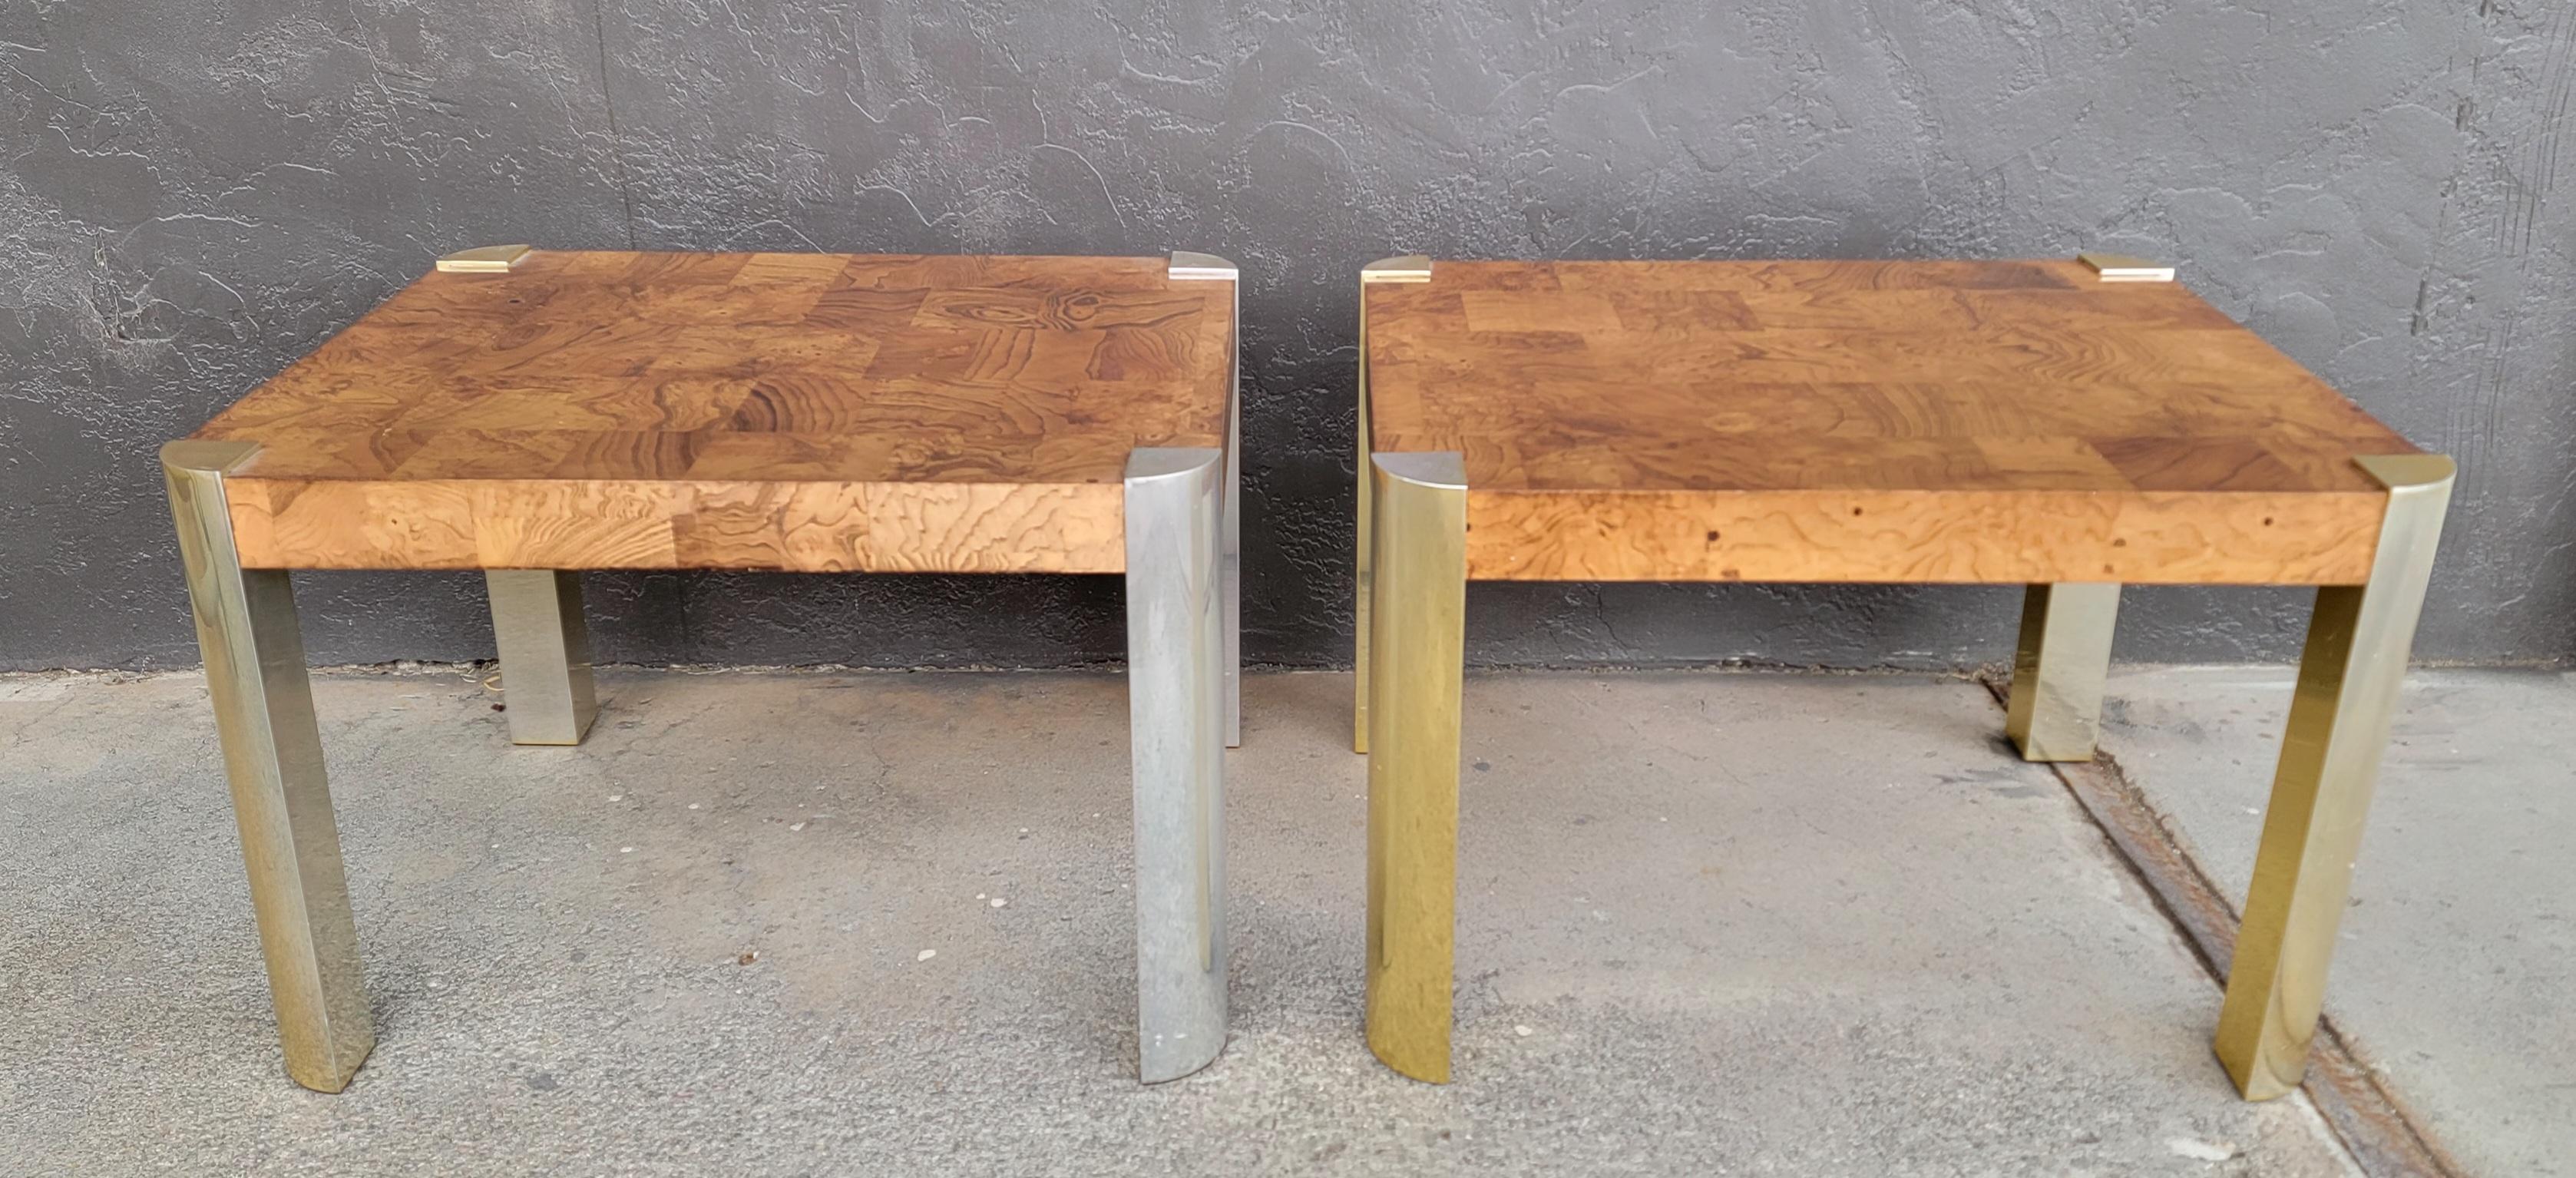 Pair Patchwork Side Tables Attributed to Milo Baughman For Sale 2